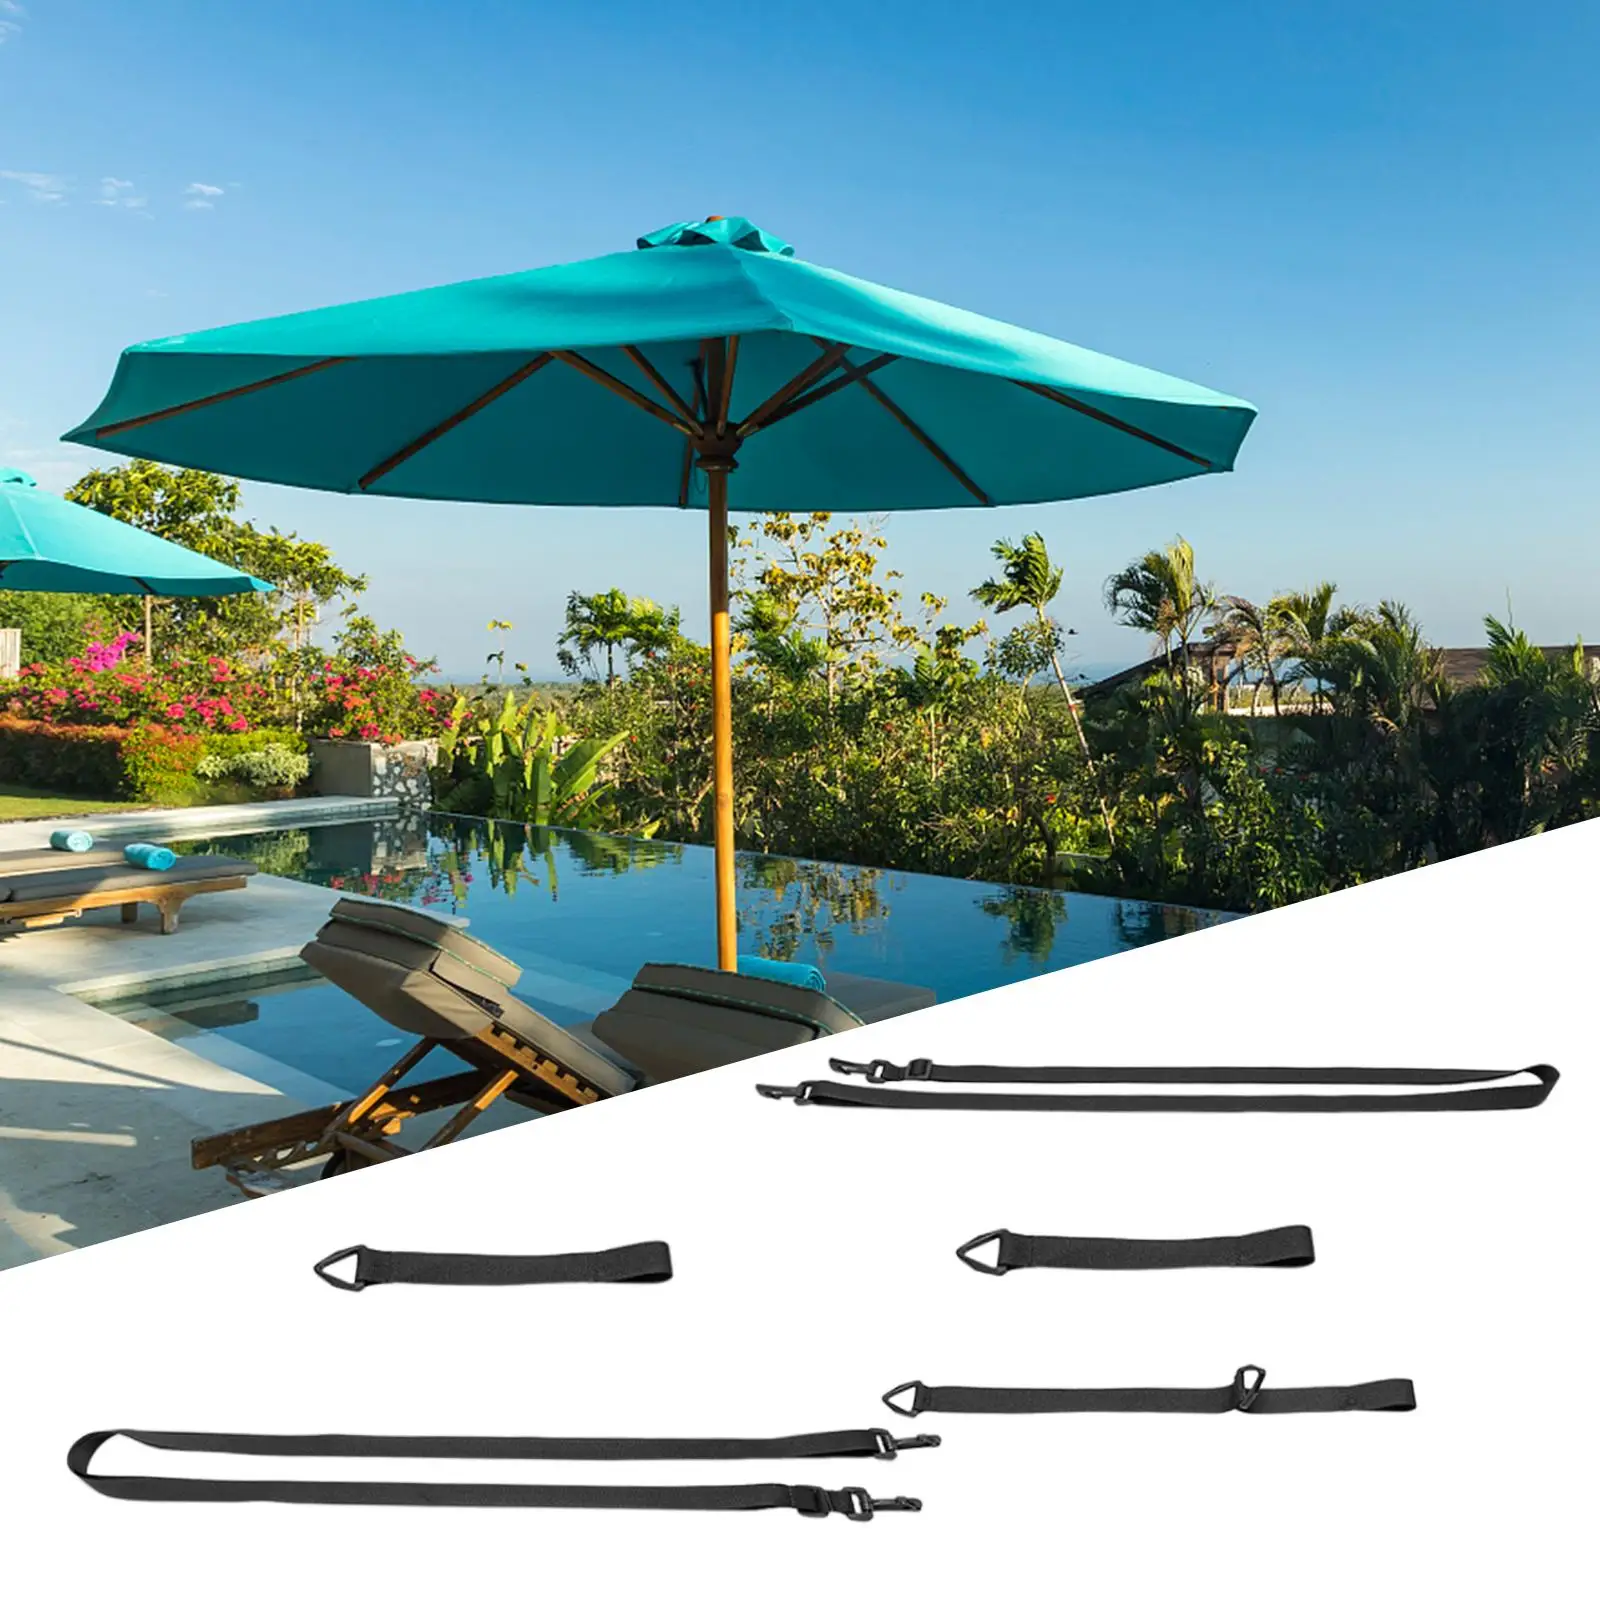 5Pcs Fixing Strap for Cantilever Wind Locks Windproof Weatherproof Adjustable Wind Protection for Parasols for Garden Yard Patio